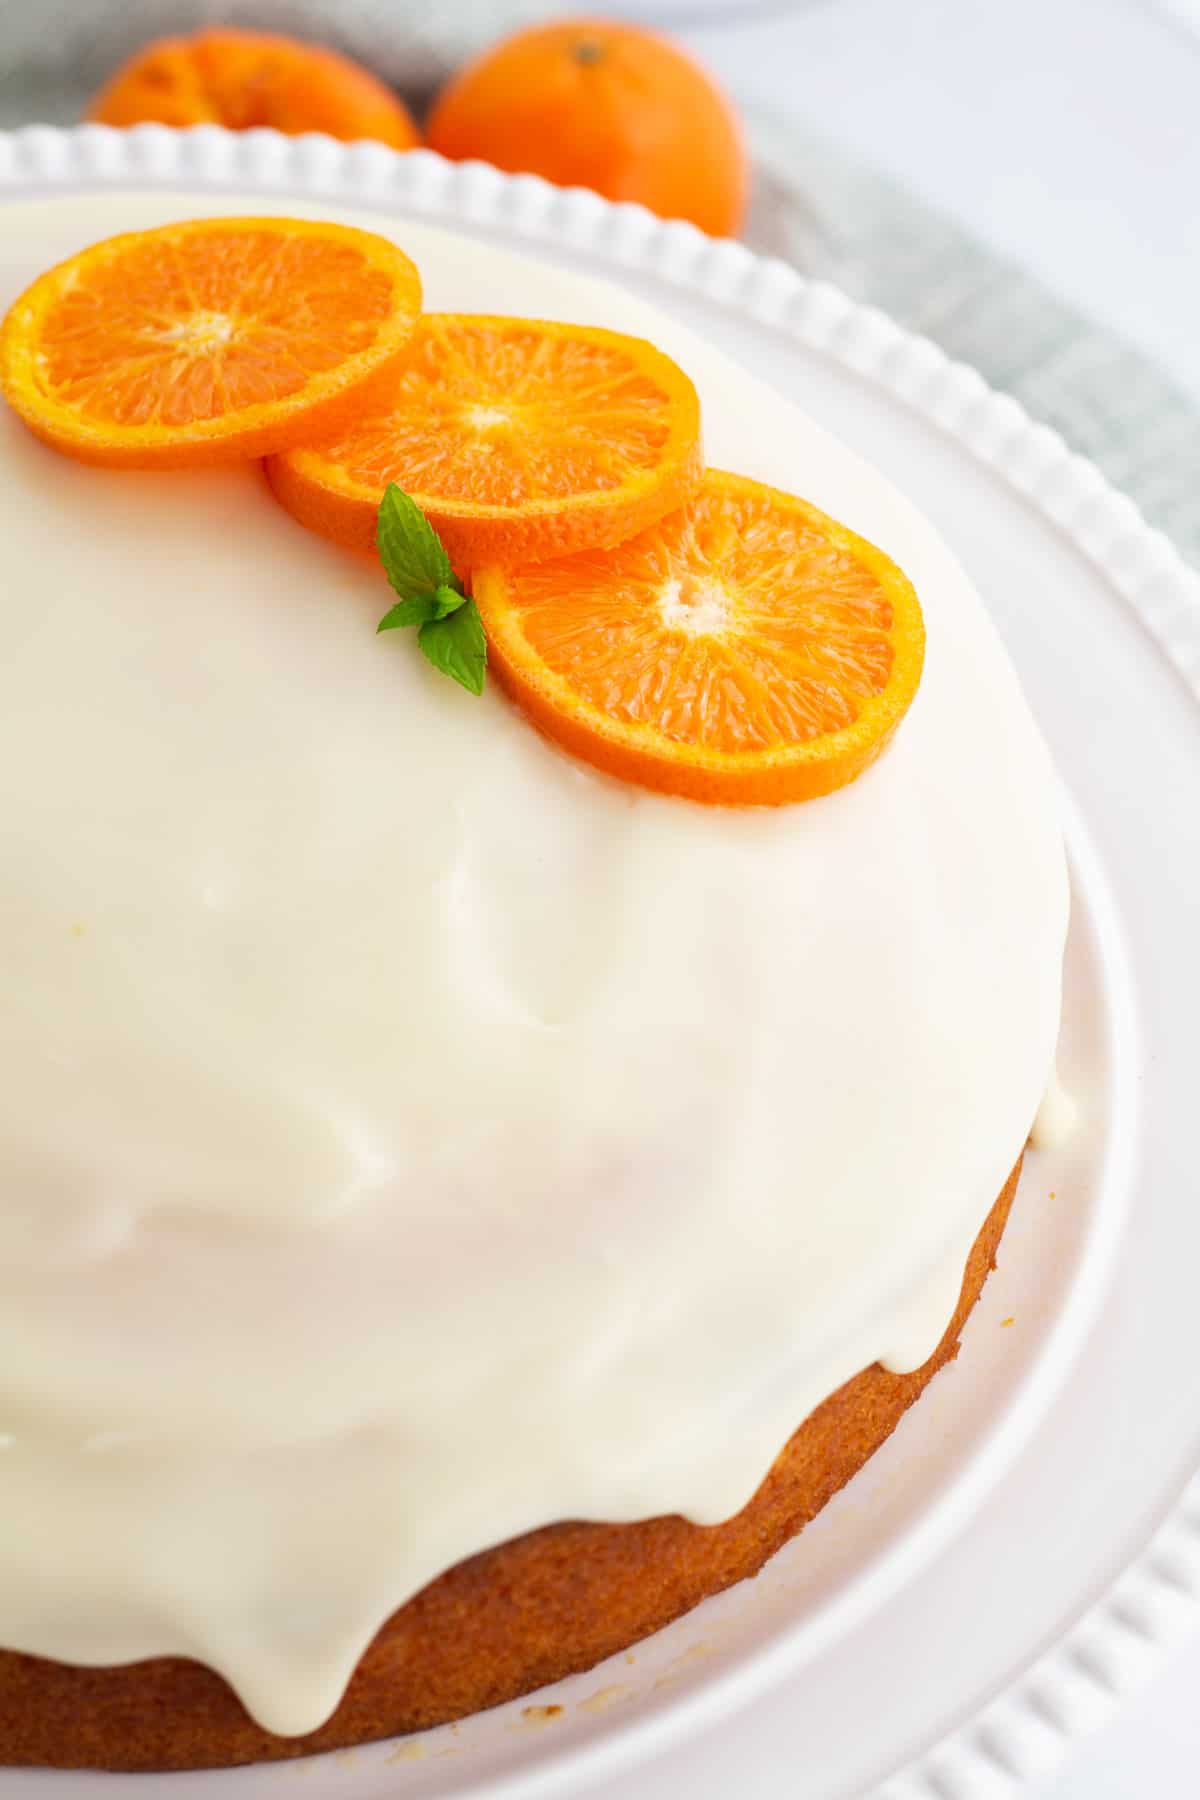 Whole clementine cake with white icing and slices of fresh clementines decorating the top.